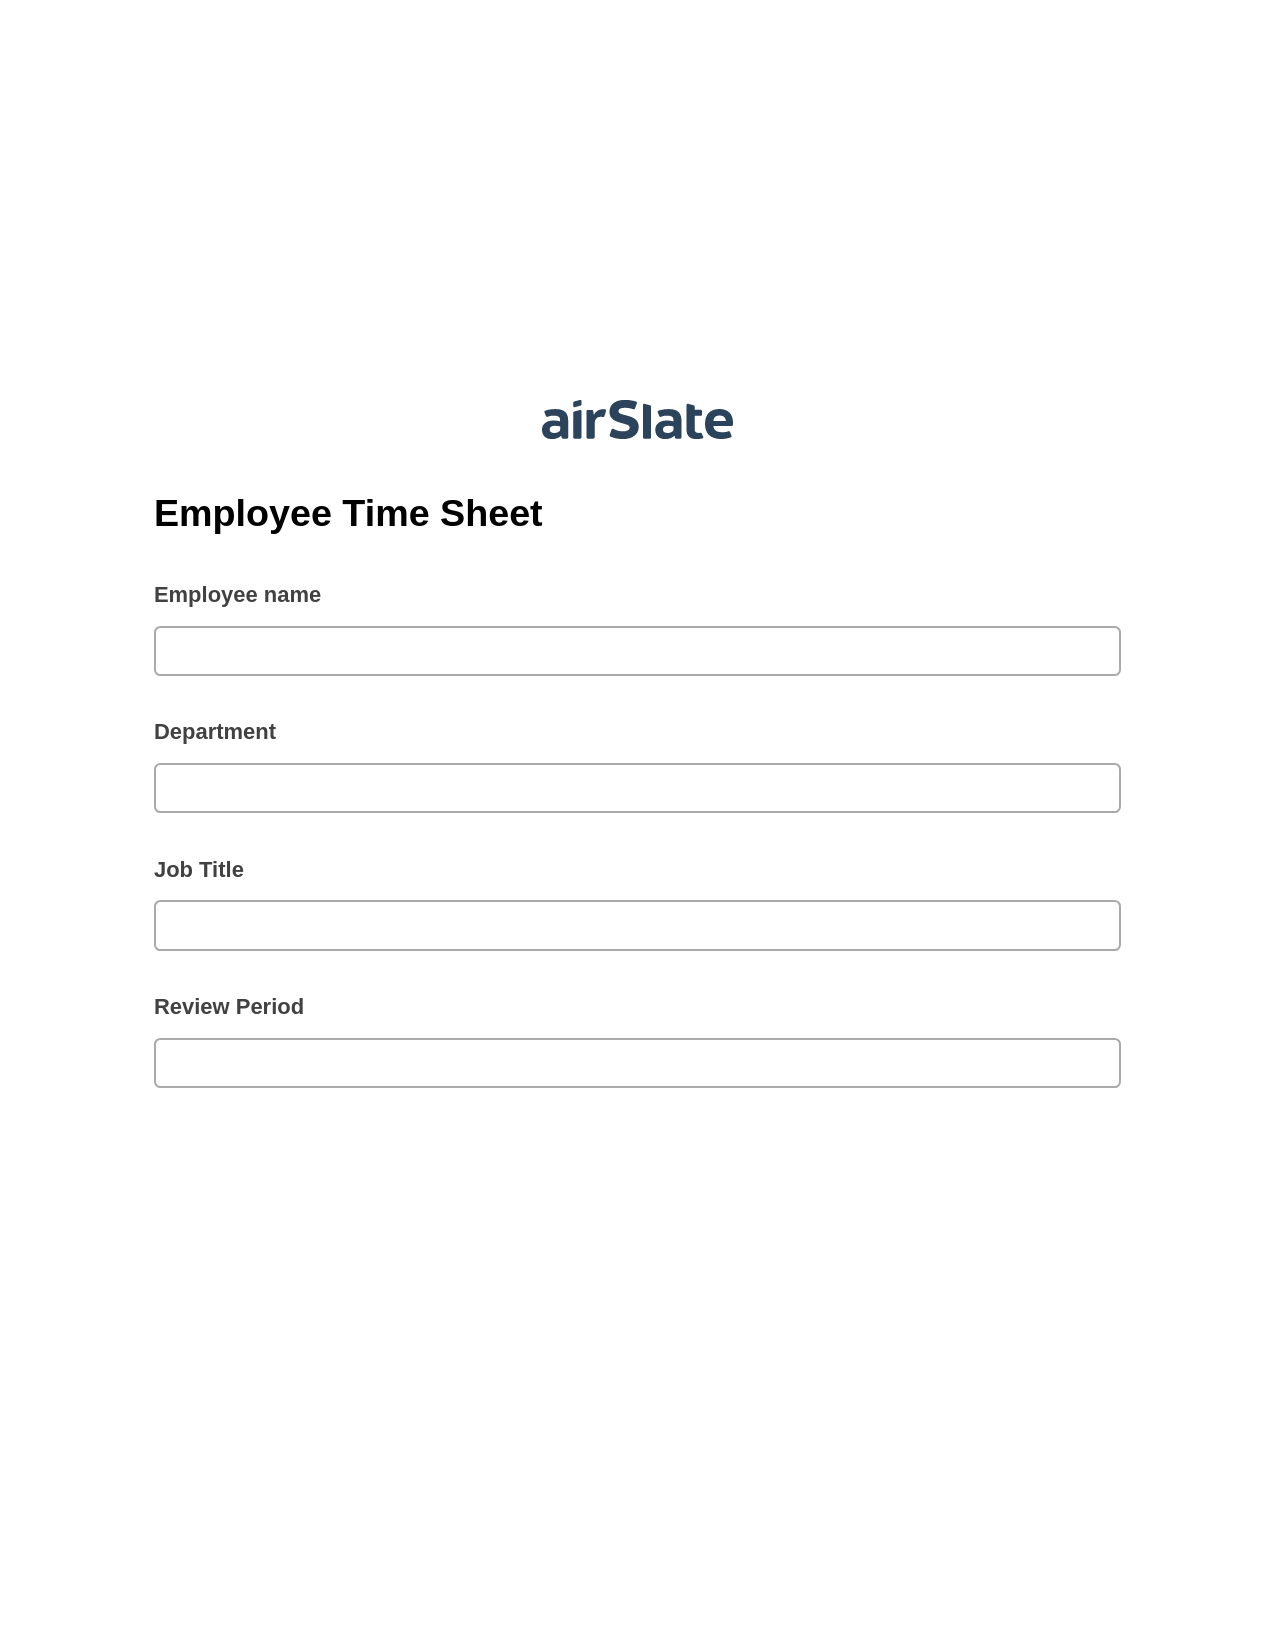 Multirole Employee Time Sheet Pre-fill from another Slate Bot, Update Audit Trail Bot, Export to NetSuite Bot